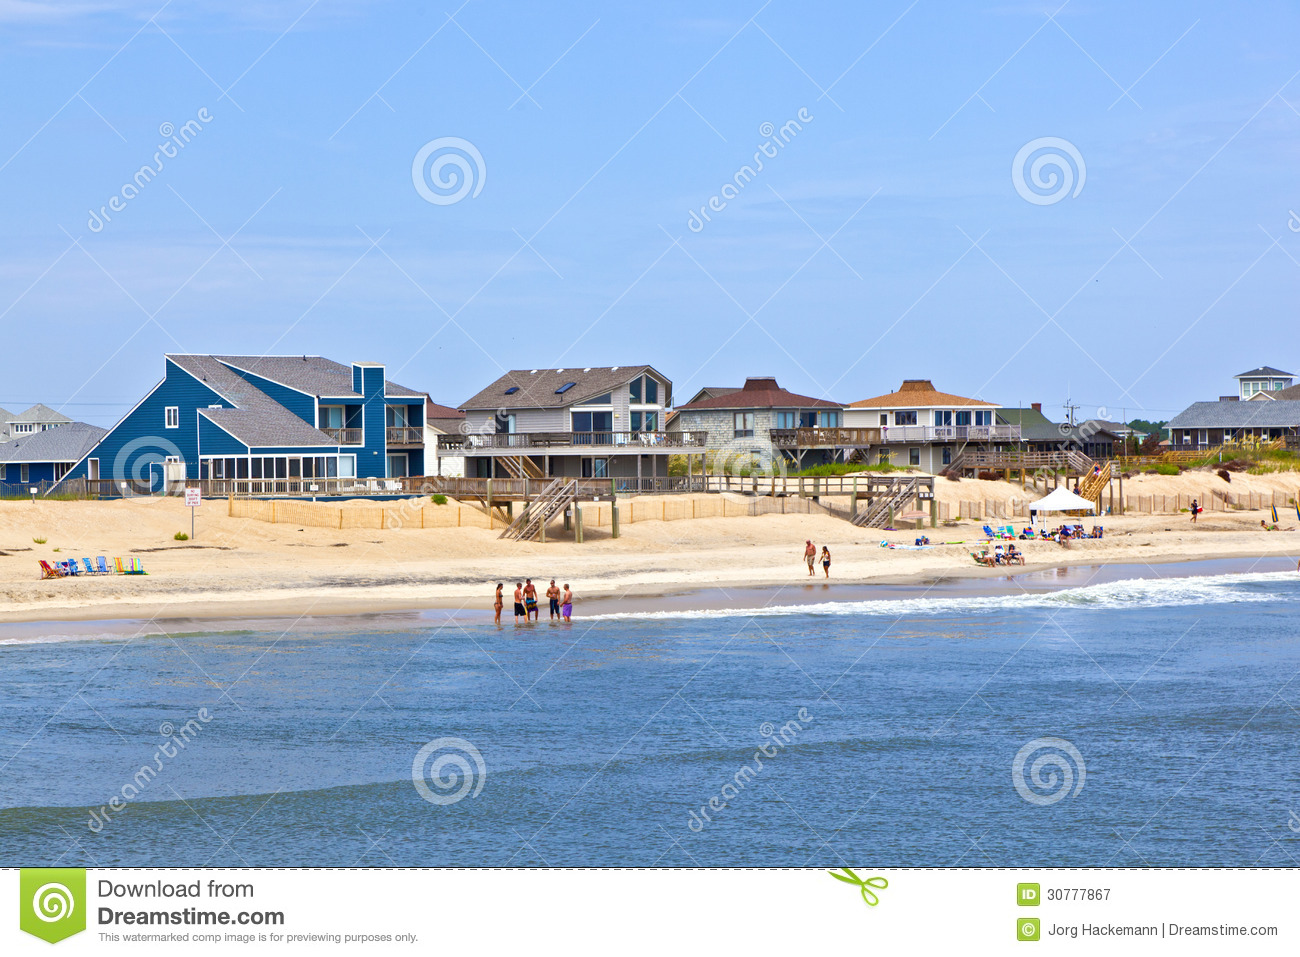 Free clipart of nags head beach pictures.